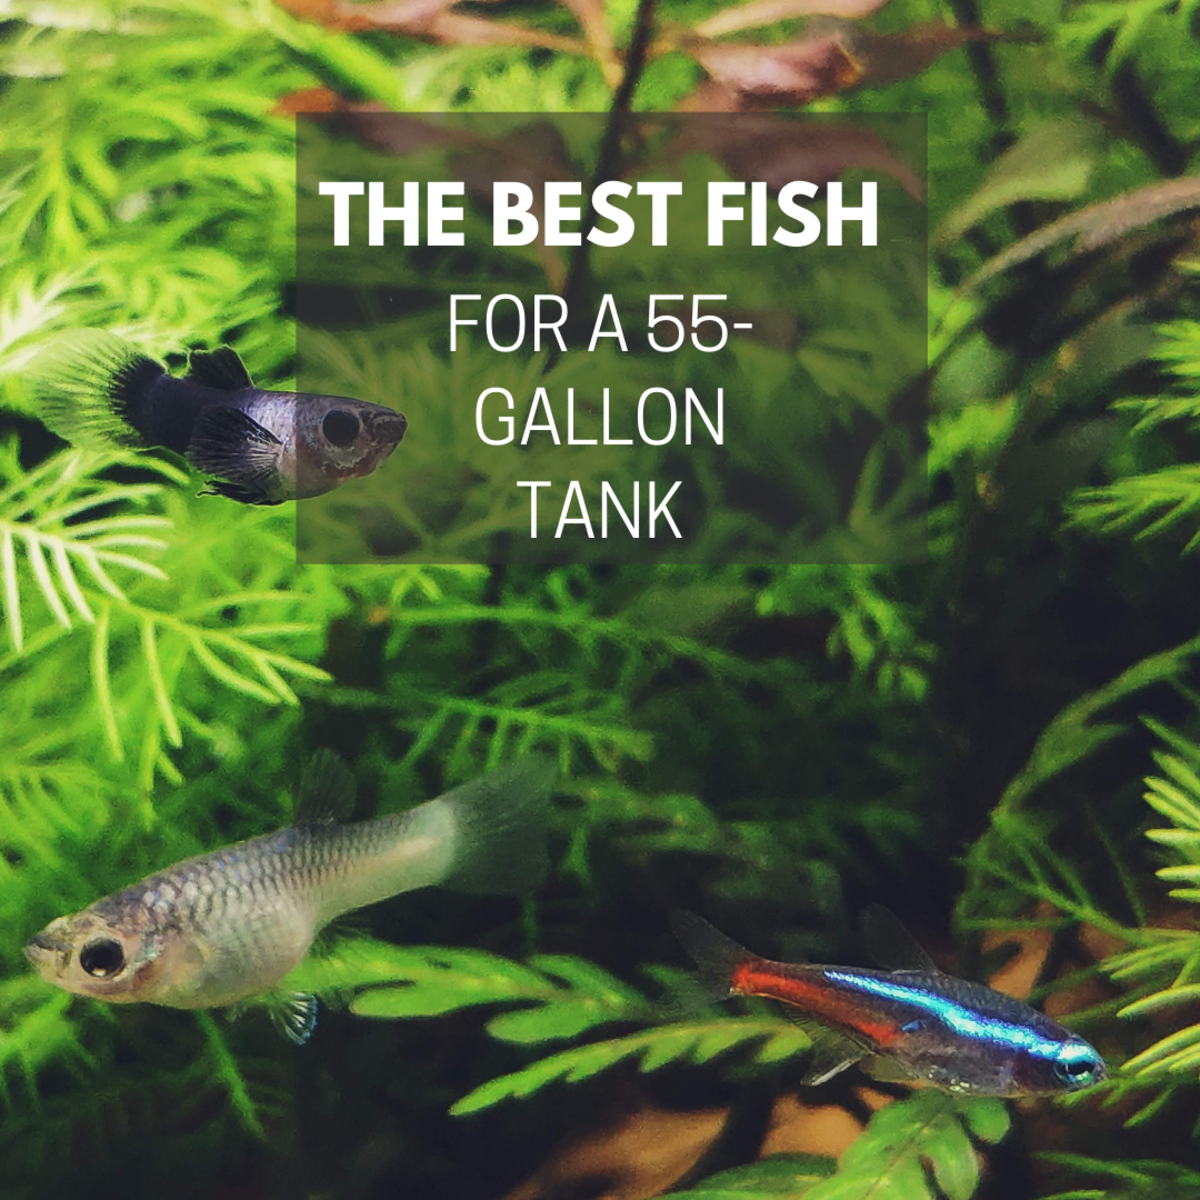 Learn which fish are best for your 55-gallon tank and how to make smart choices when stocking your freshwater aquarium.